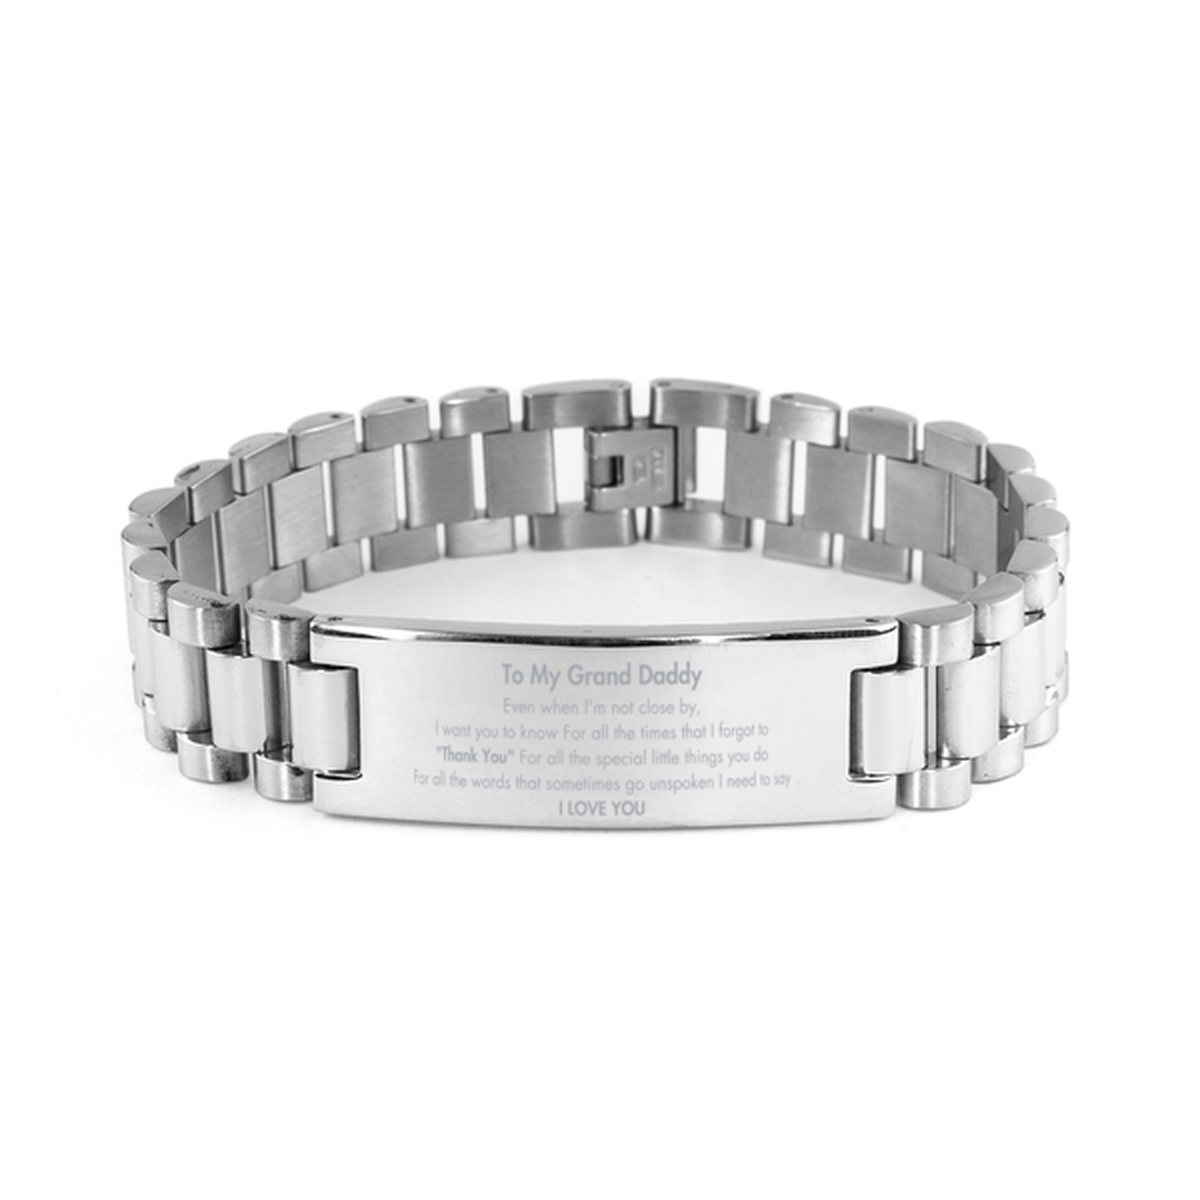 Thank You Gifts for Grand Daddy, Keepsake Ladder Stainless Steel Bracelet Gifts for Grand Daddy Birthday Mother's day Father's Day Grand Daddy For all the words That sometimes go unspoken I need to say I LOVE YOU